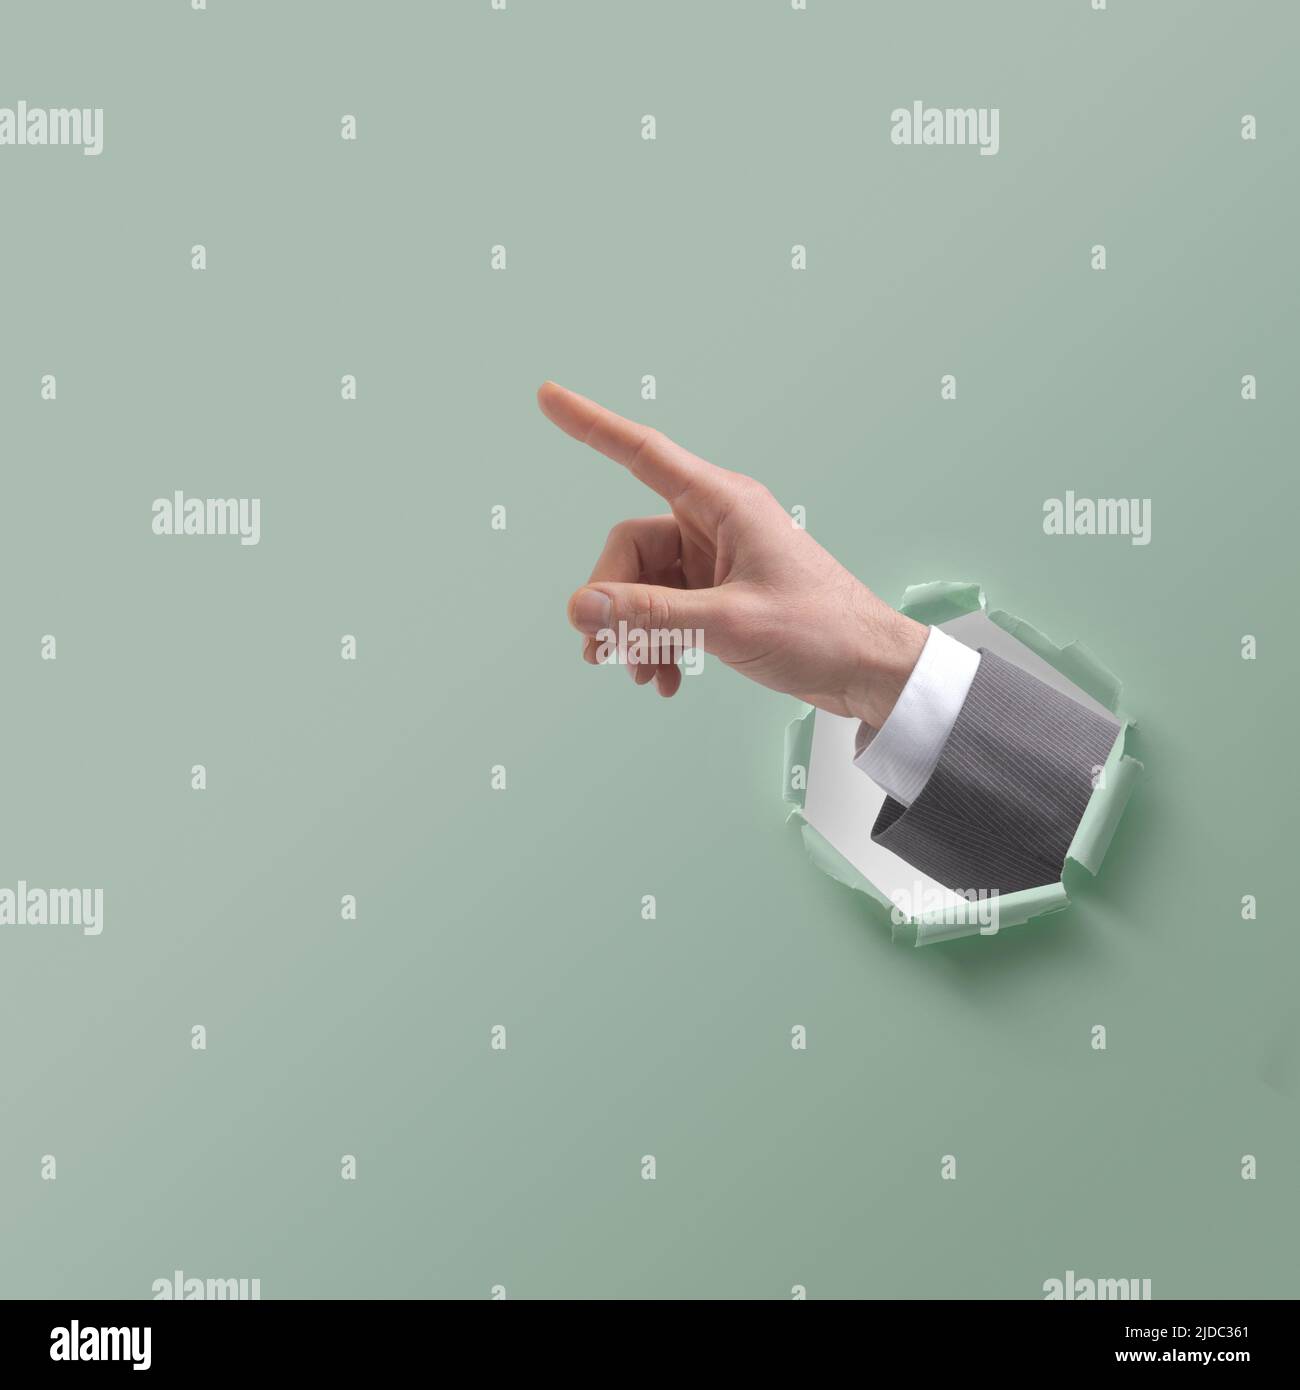 Businessman hand pointing and coming out of a hole in paper Stock Photo